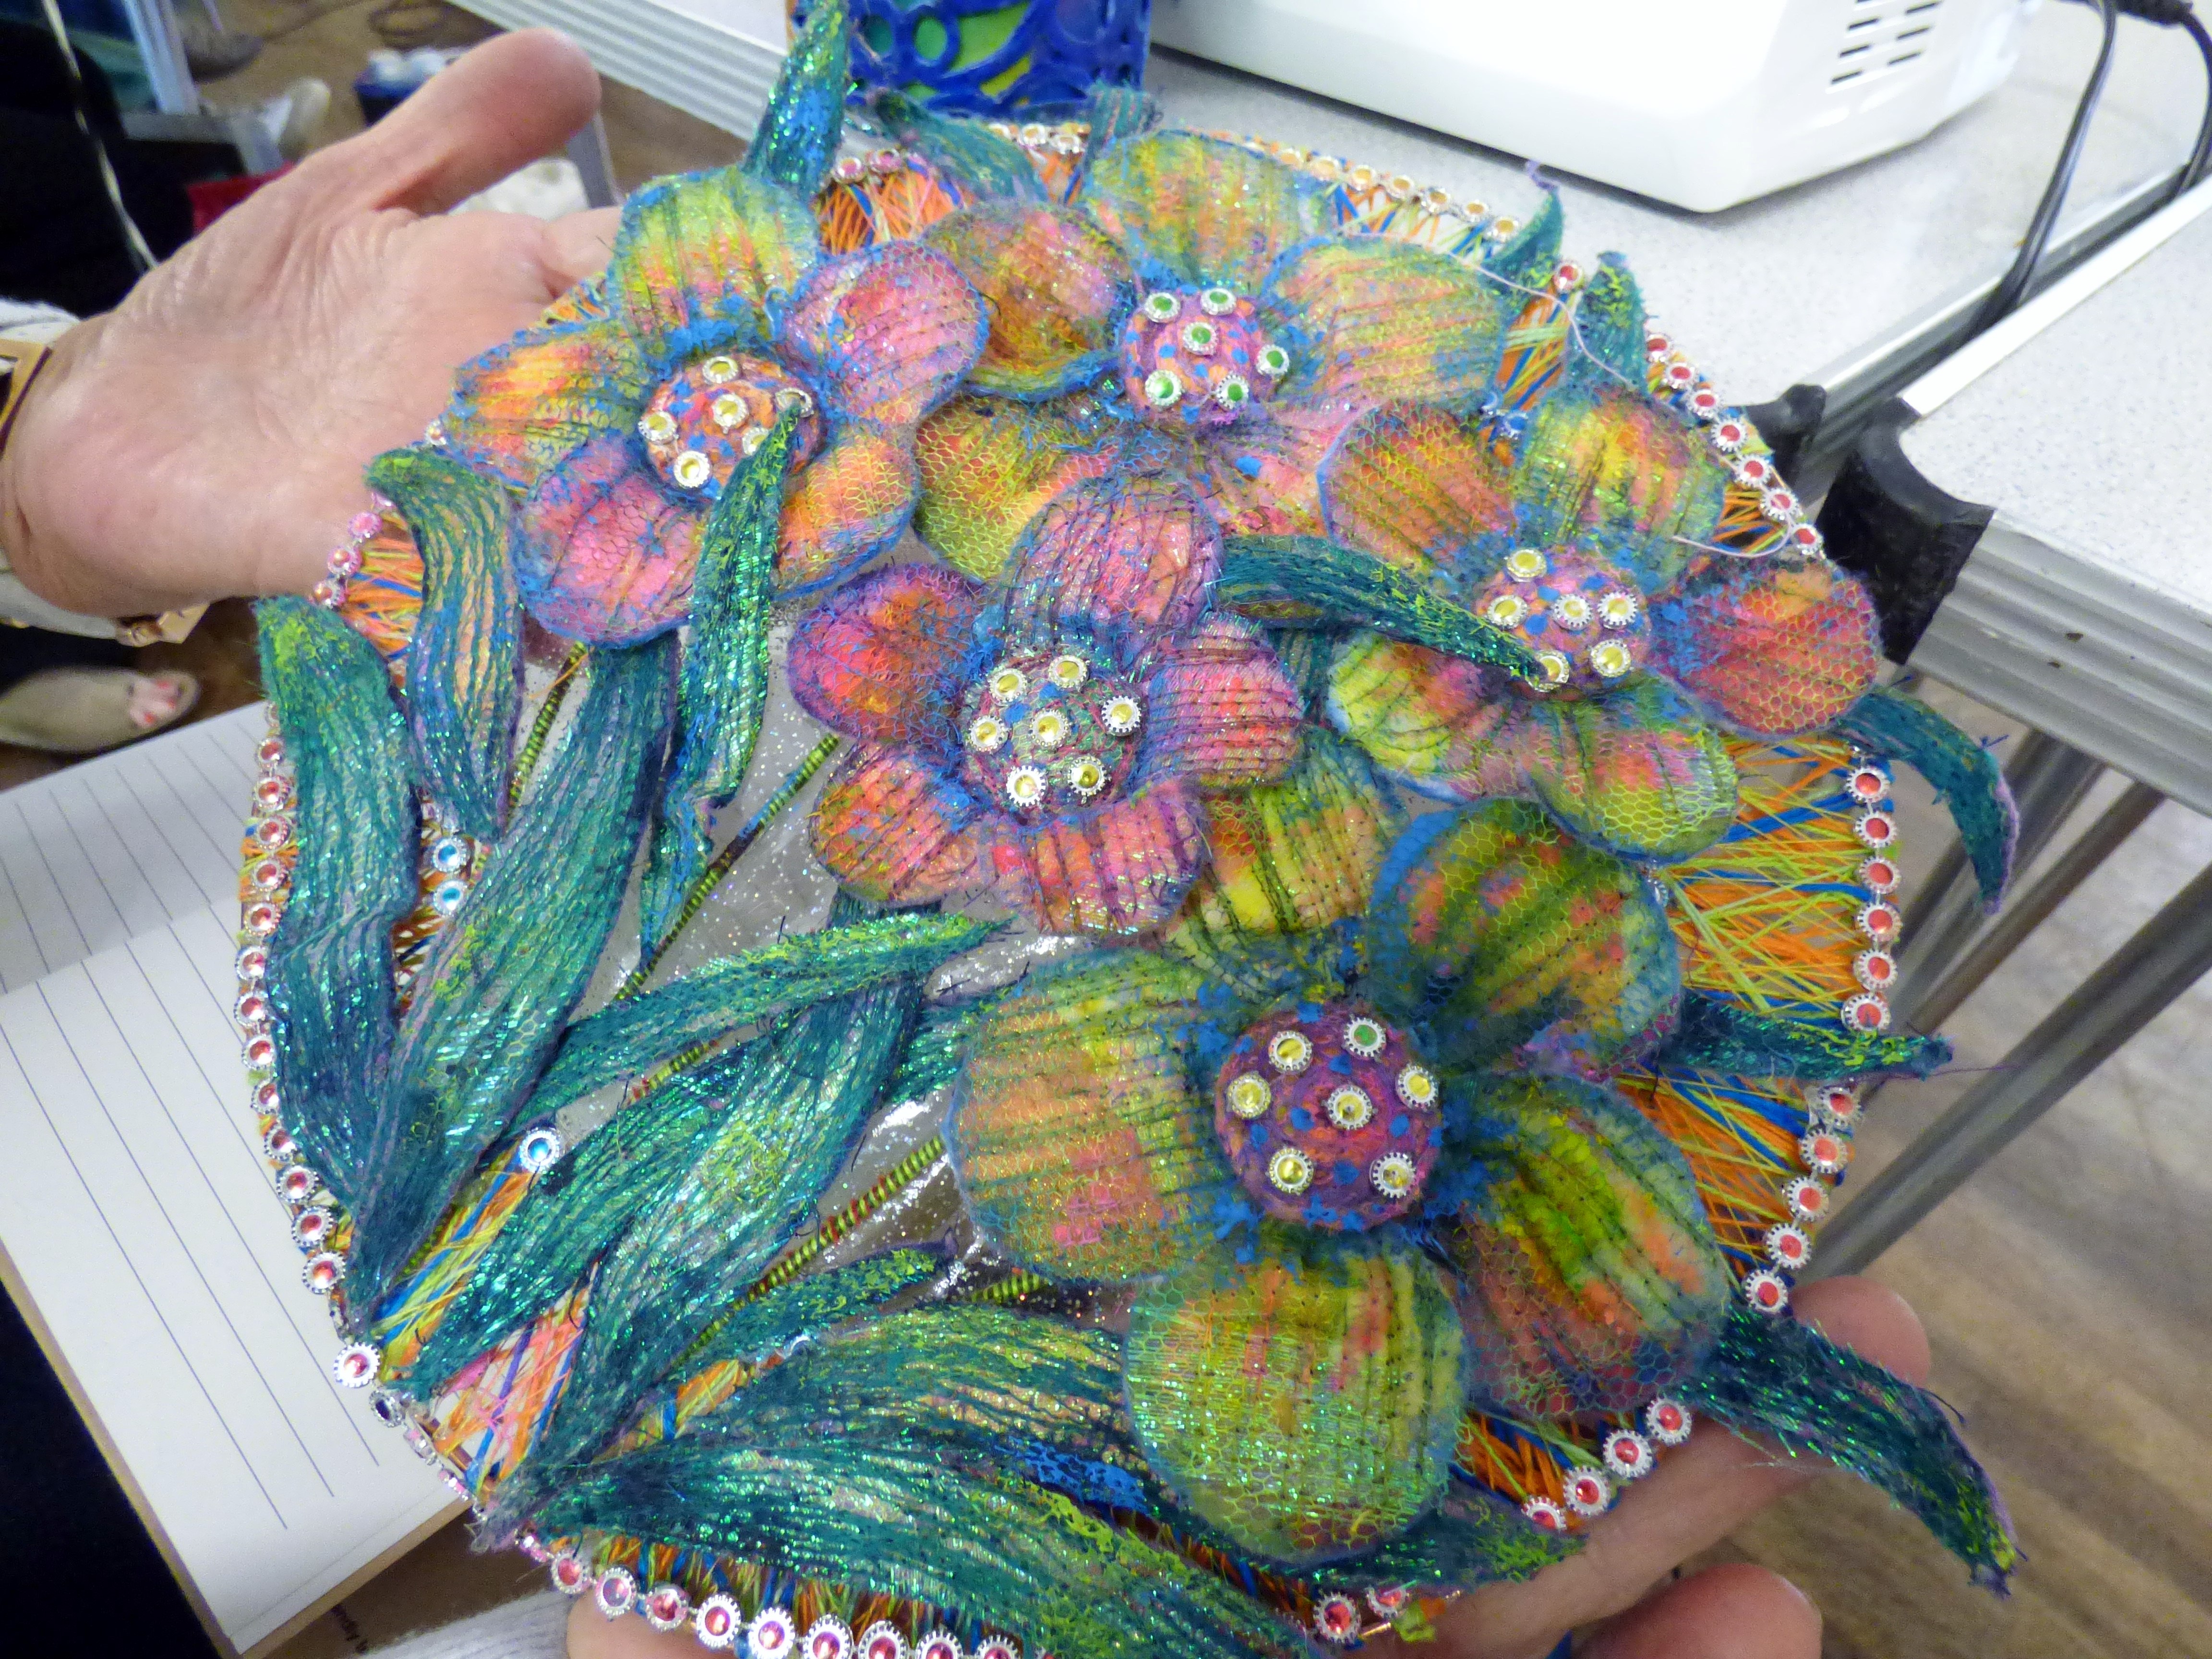 embroidery by Nikki Parmenter at "Fantastic Fish" workshop by Nikki Parmenter